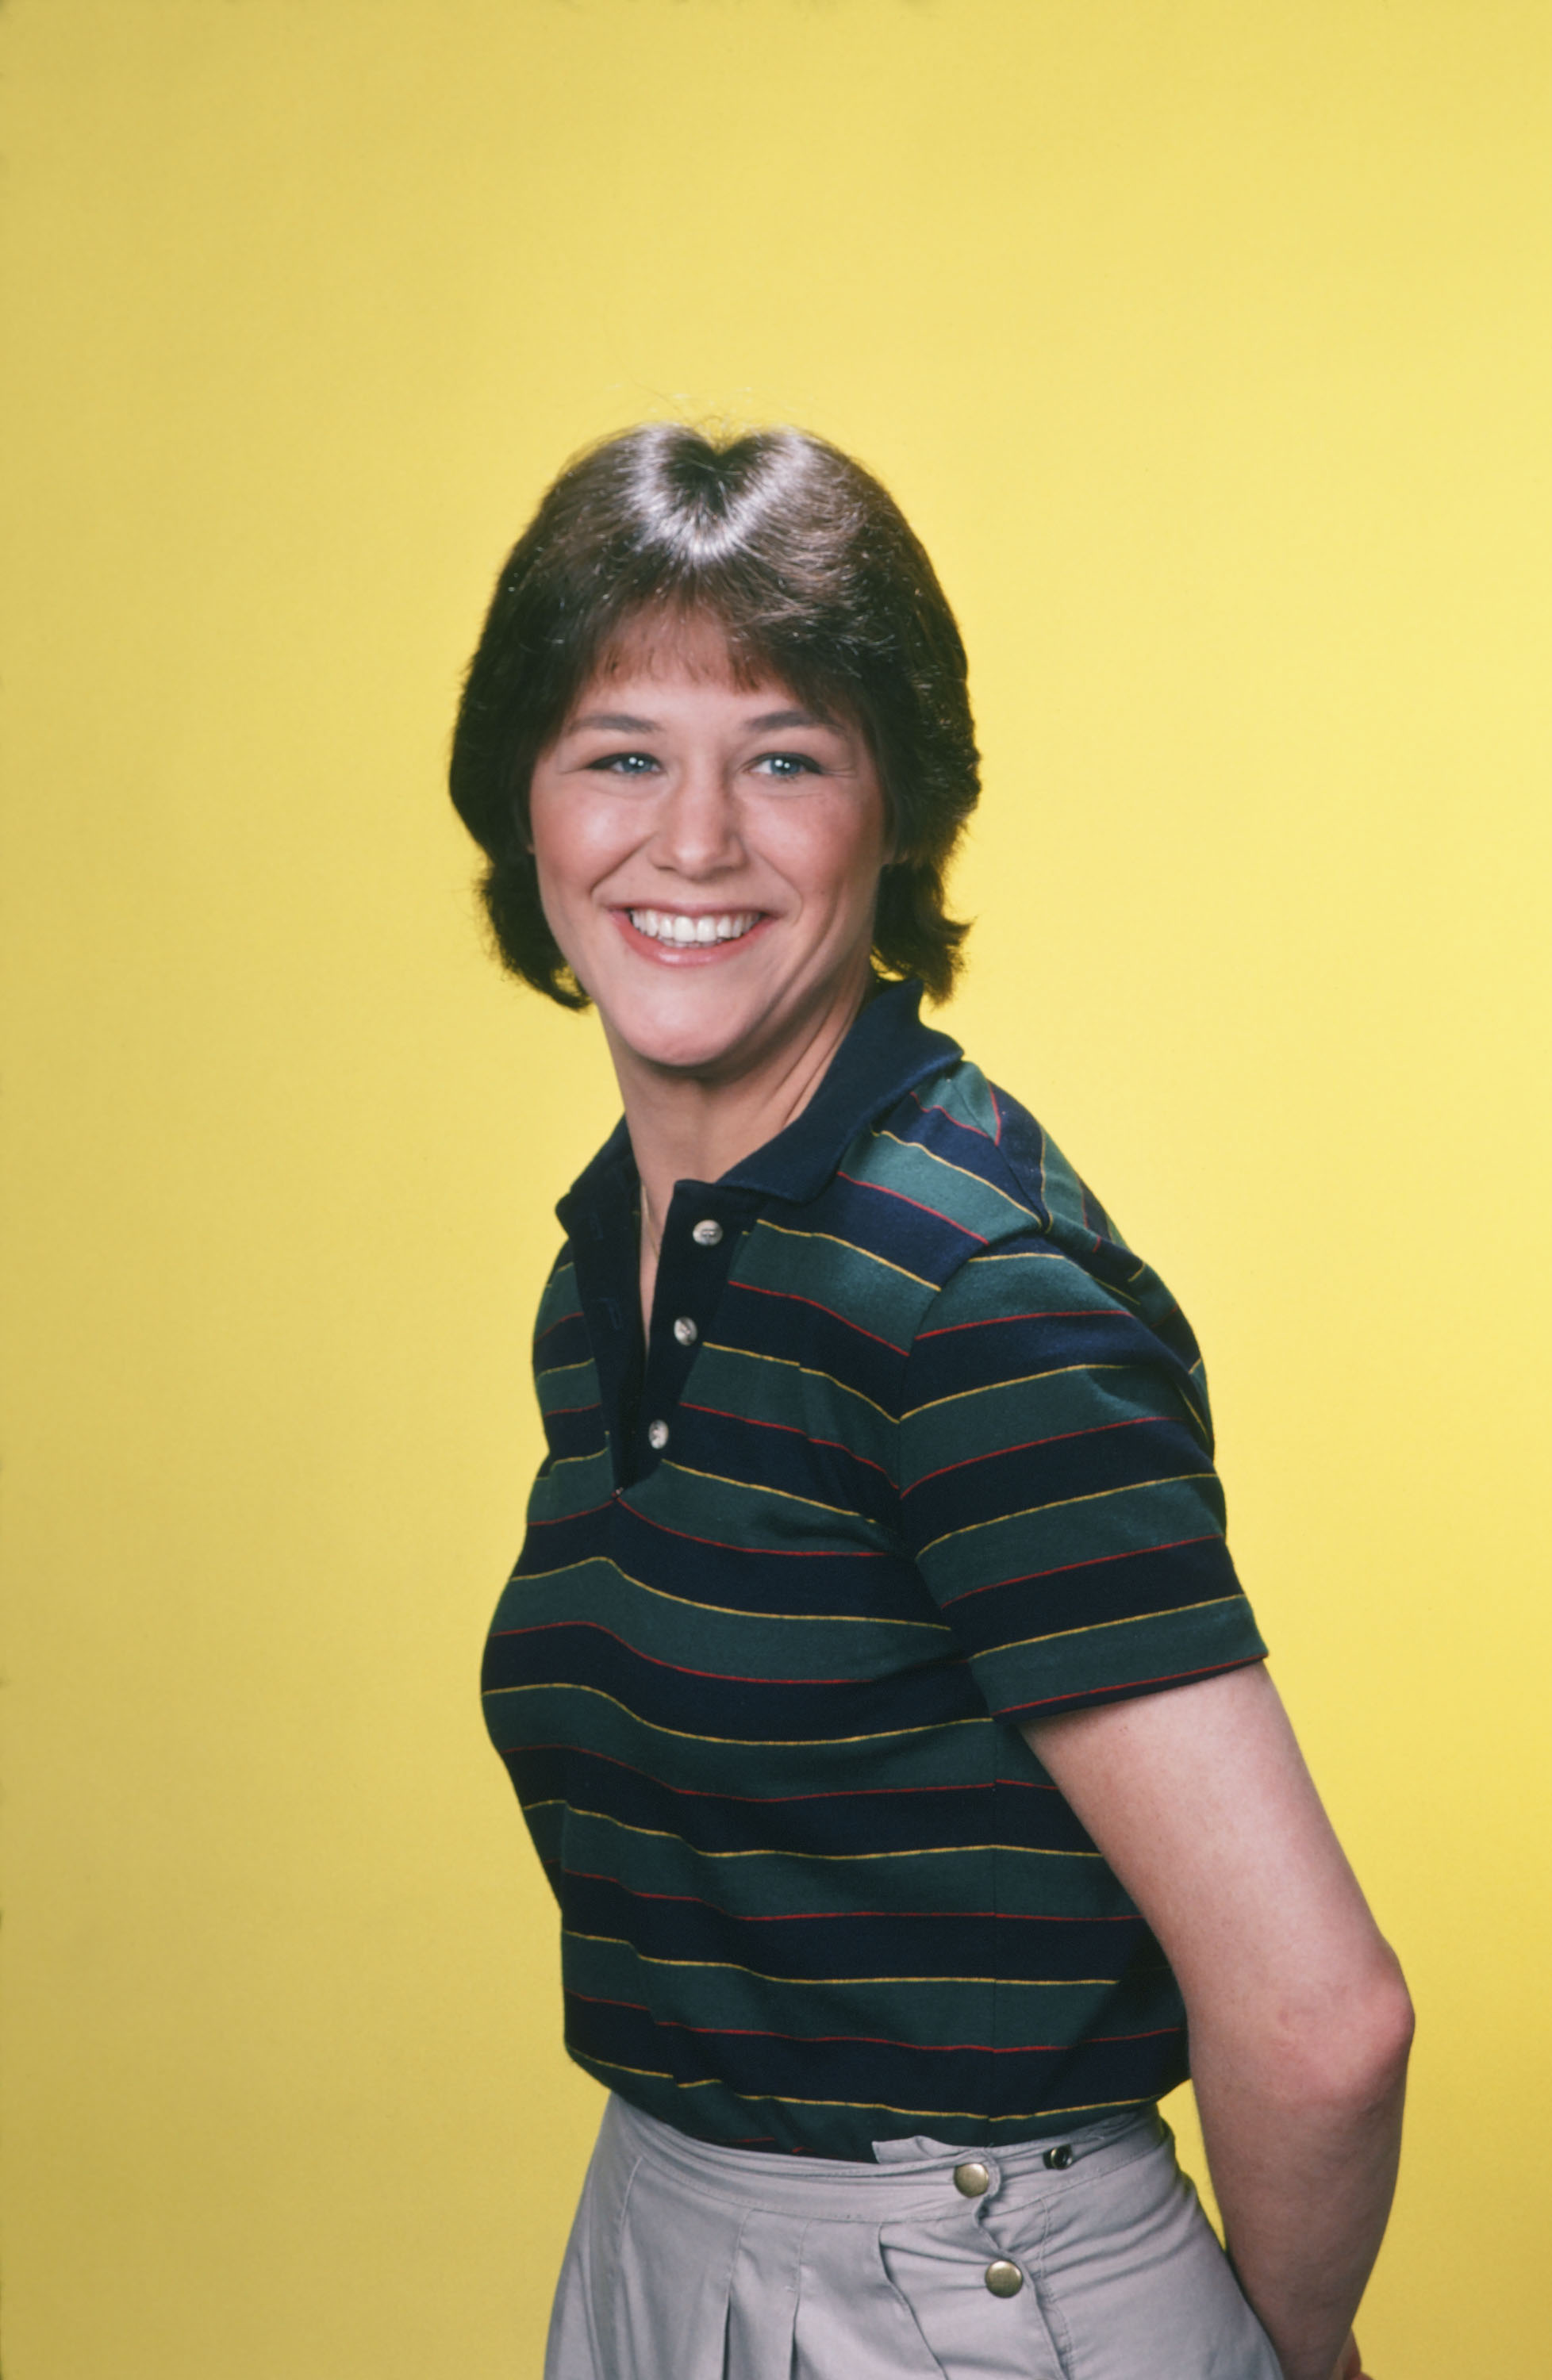 Actress Geri Jewell pictured as Geri Tyler in the television sitcom, "The Facts of Life" on November 12, 1981 | Source: Getty Images